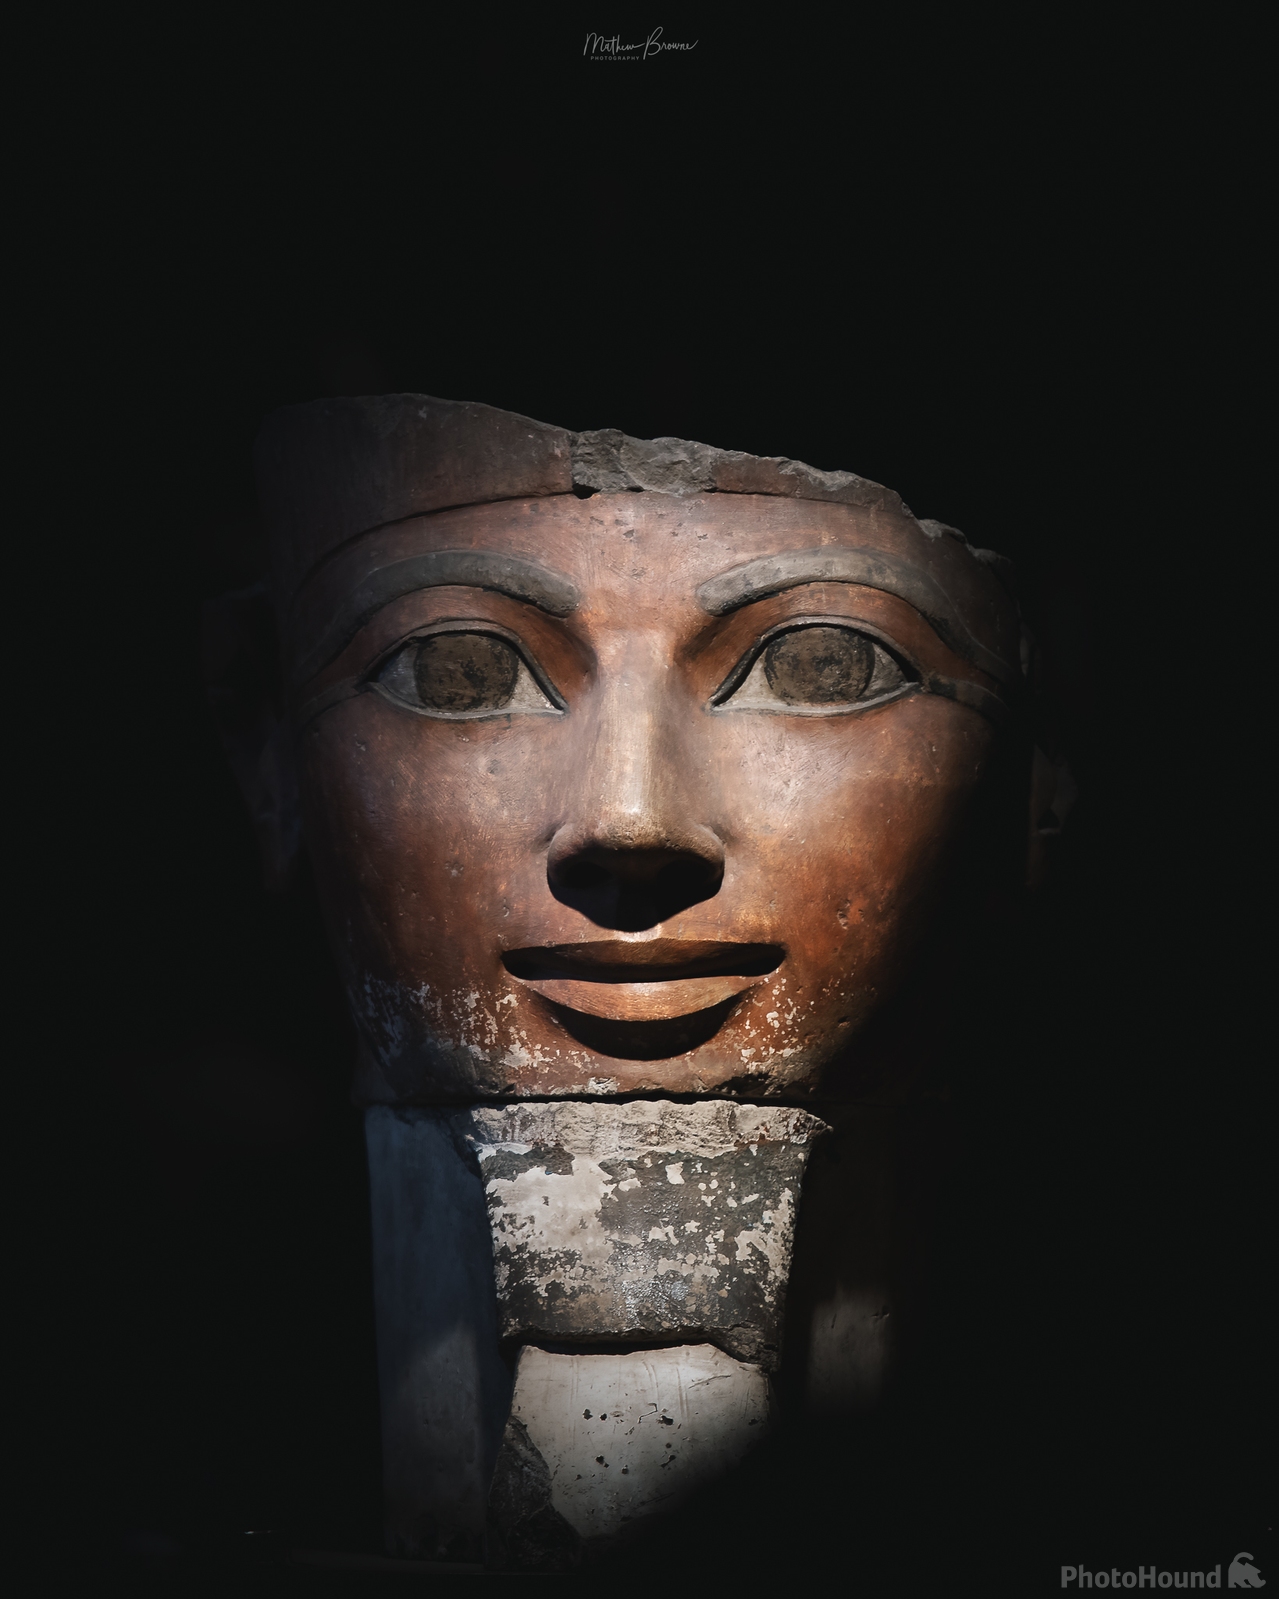 Image of The Egyptian Museum by Mathew Browne